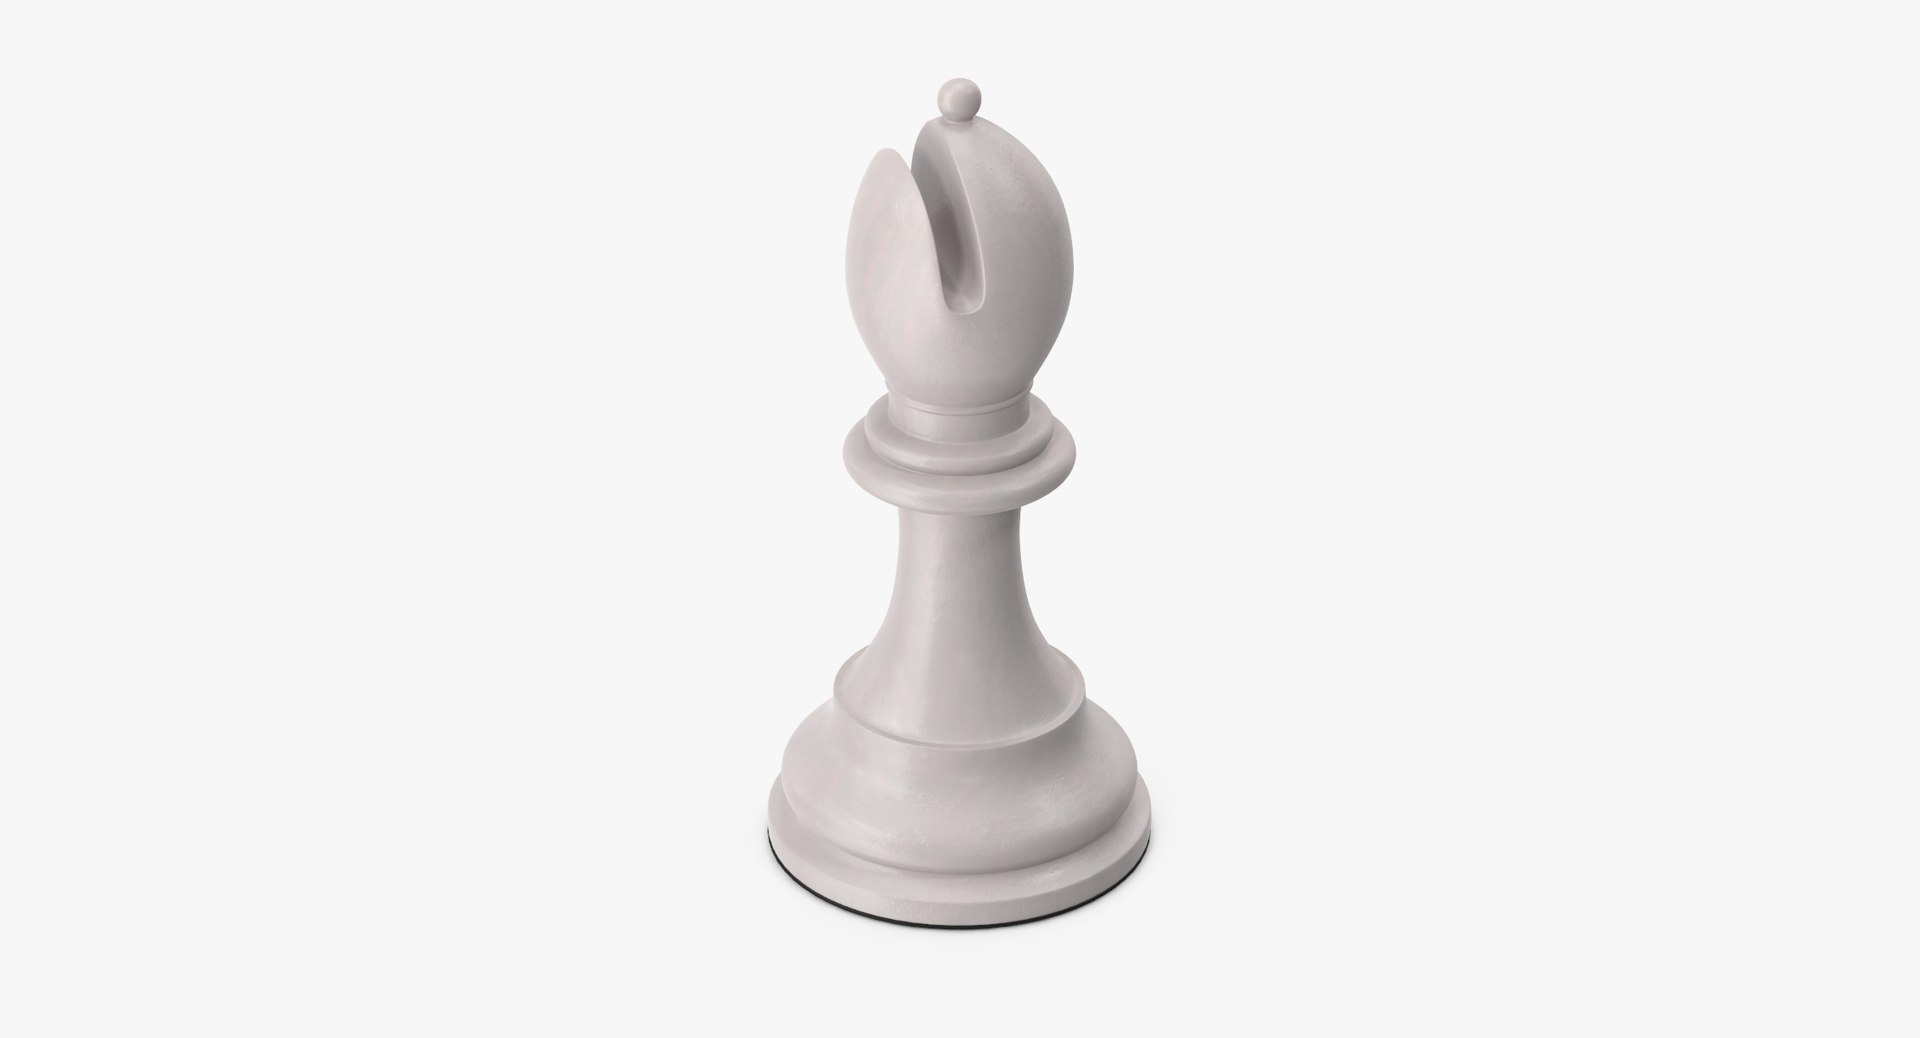 3d rendering black and white chess pieces pawn rook knight bishop